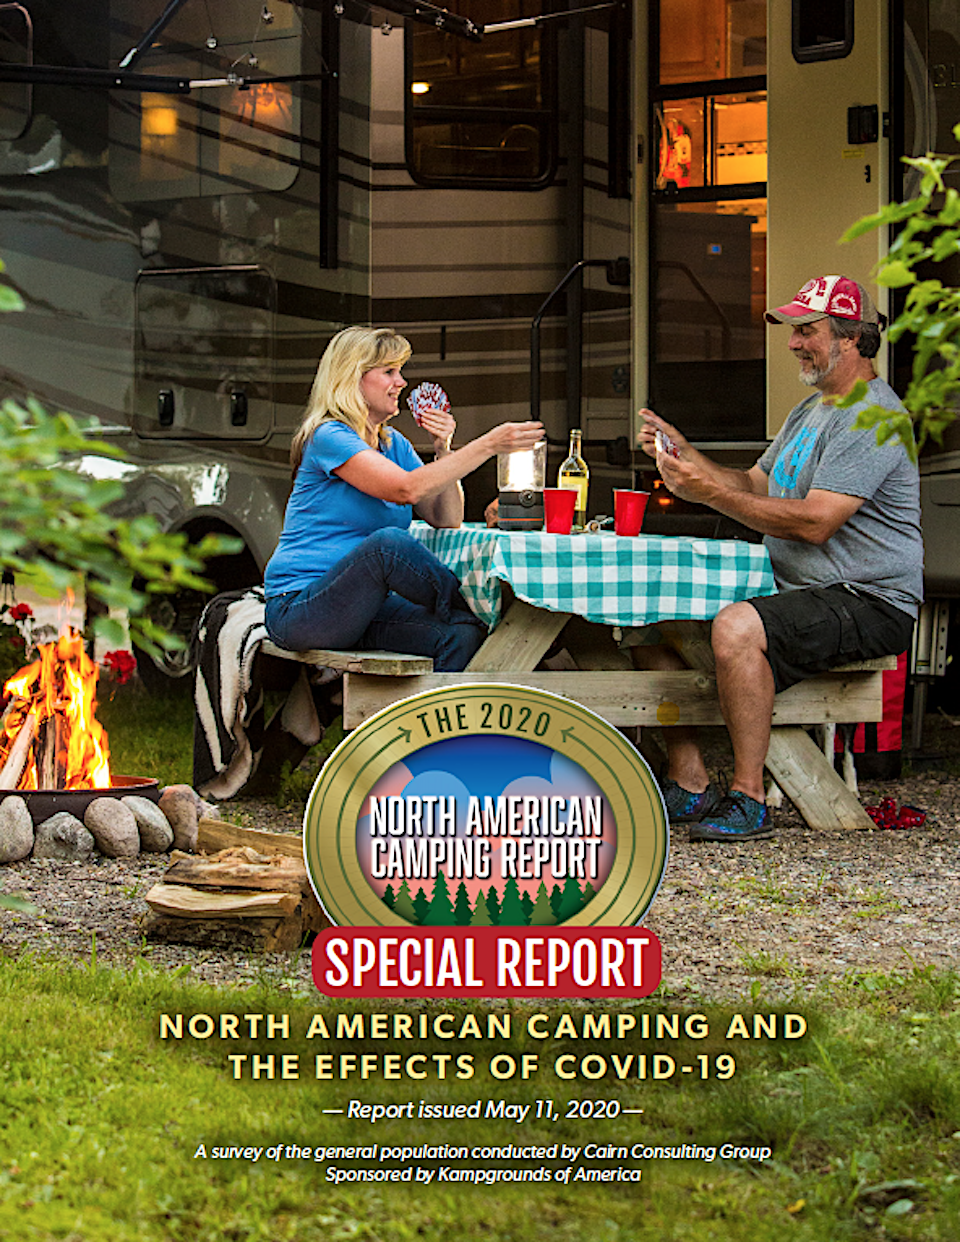 Survey finds campers are looking forward to getting back outdoors/KOA